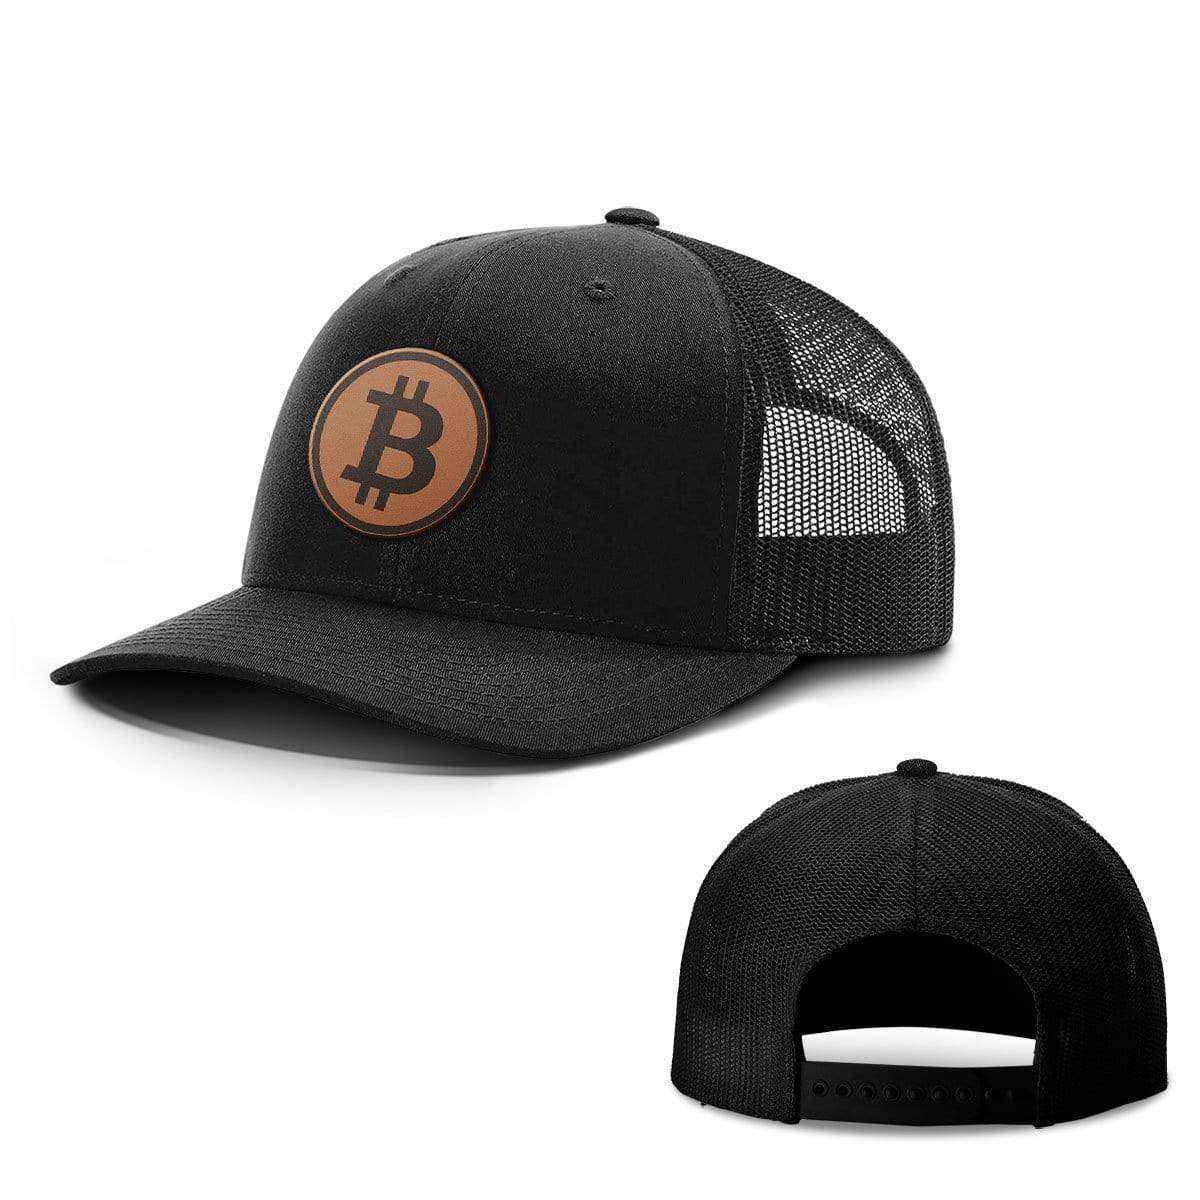 SunFrog-Busted Hats Snapback / Full Black / One Size Bitcoin Leather Patch Hats